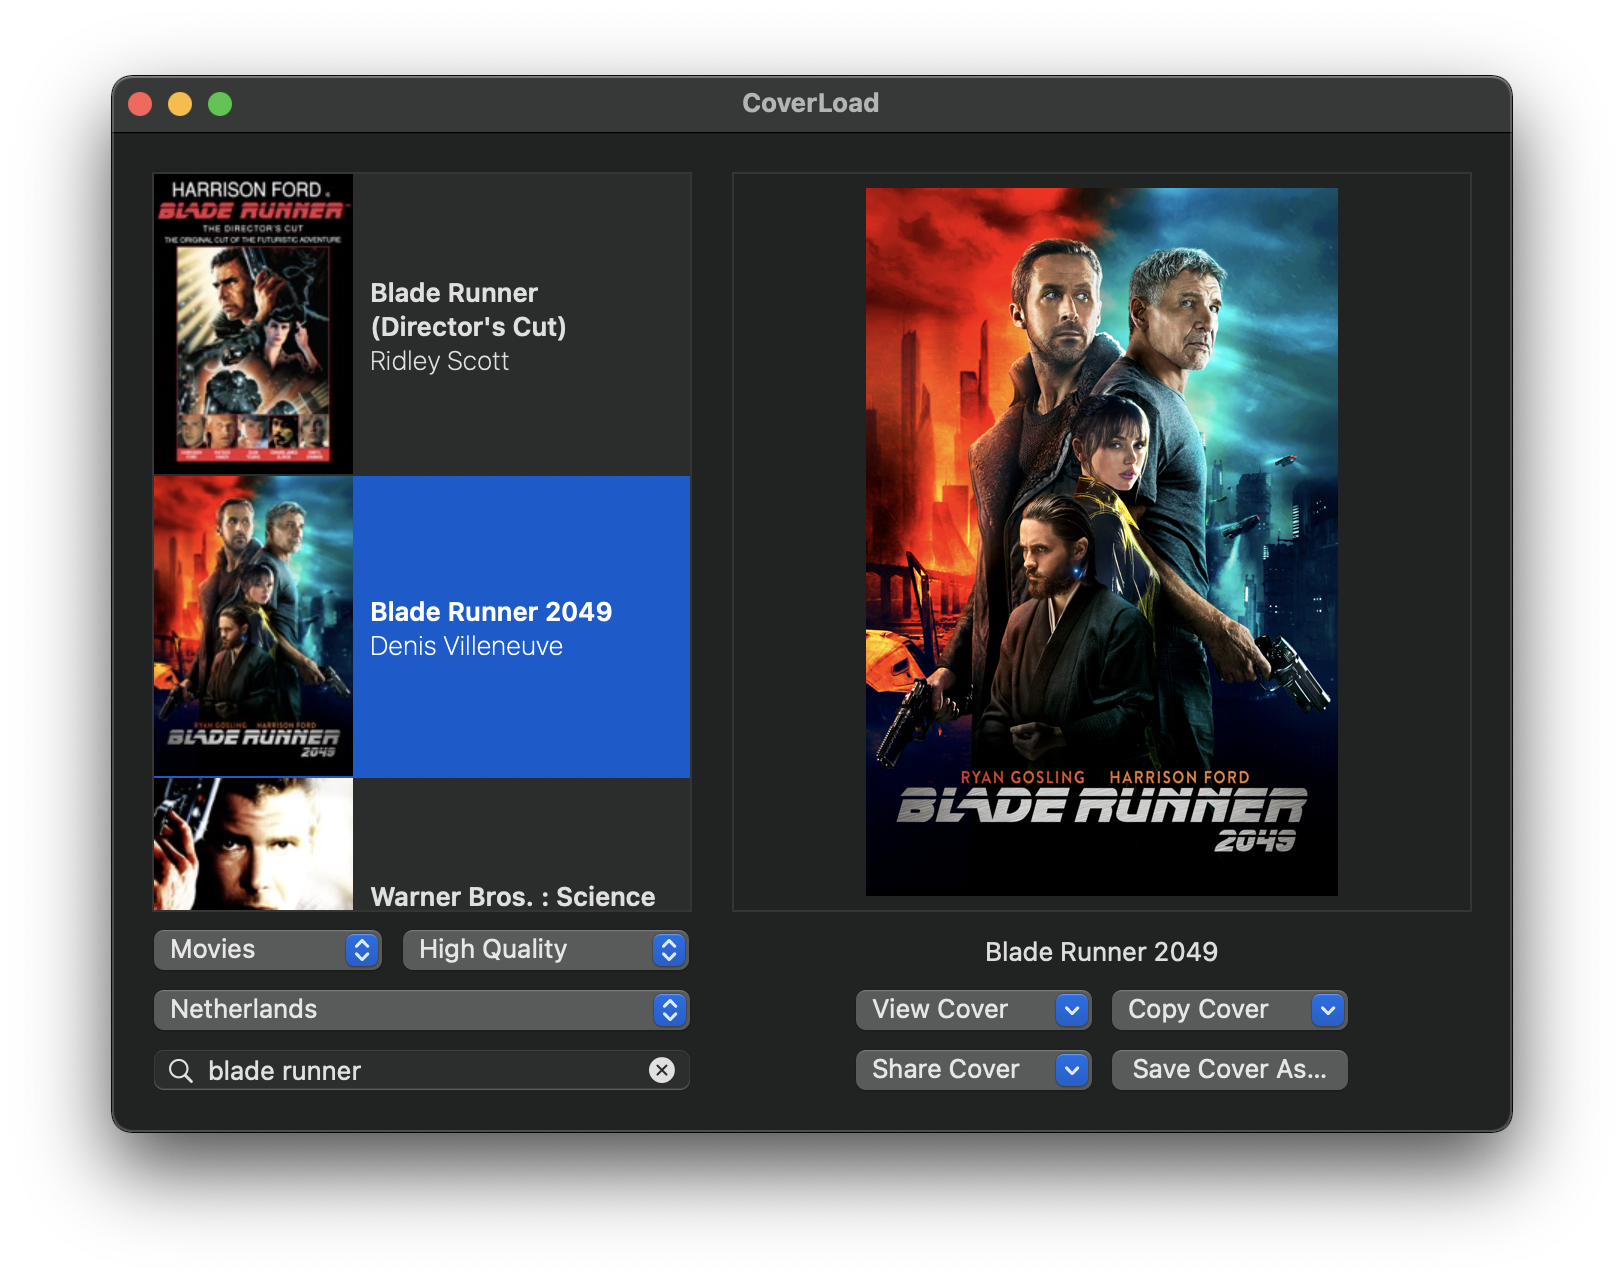 how to add artwork to itunes movies